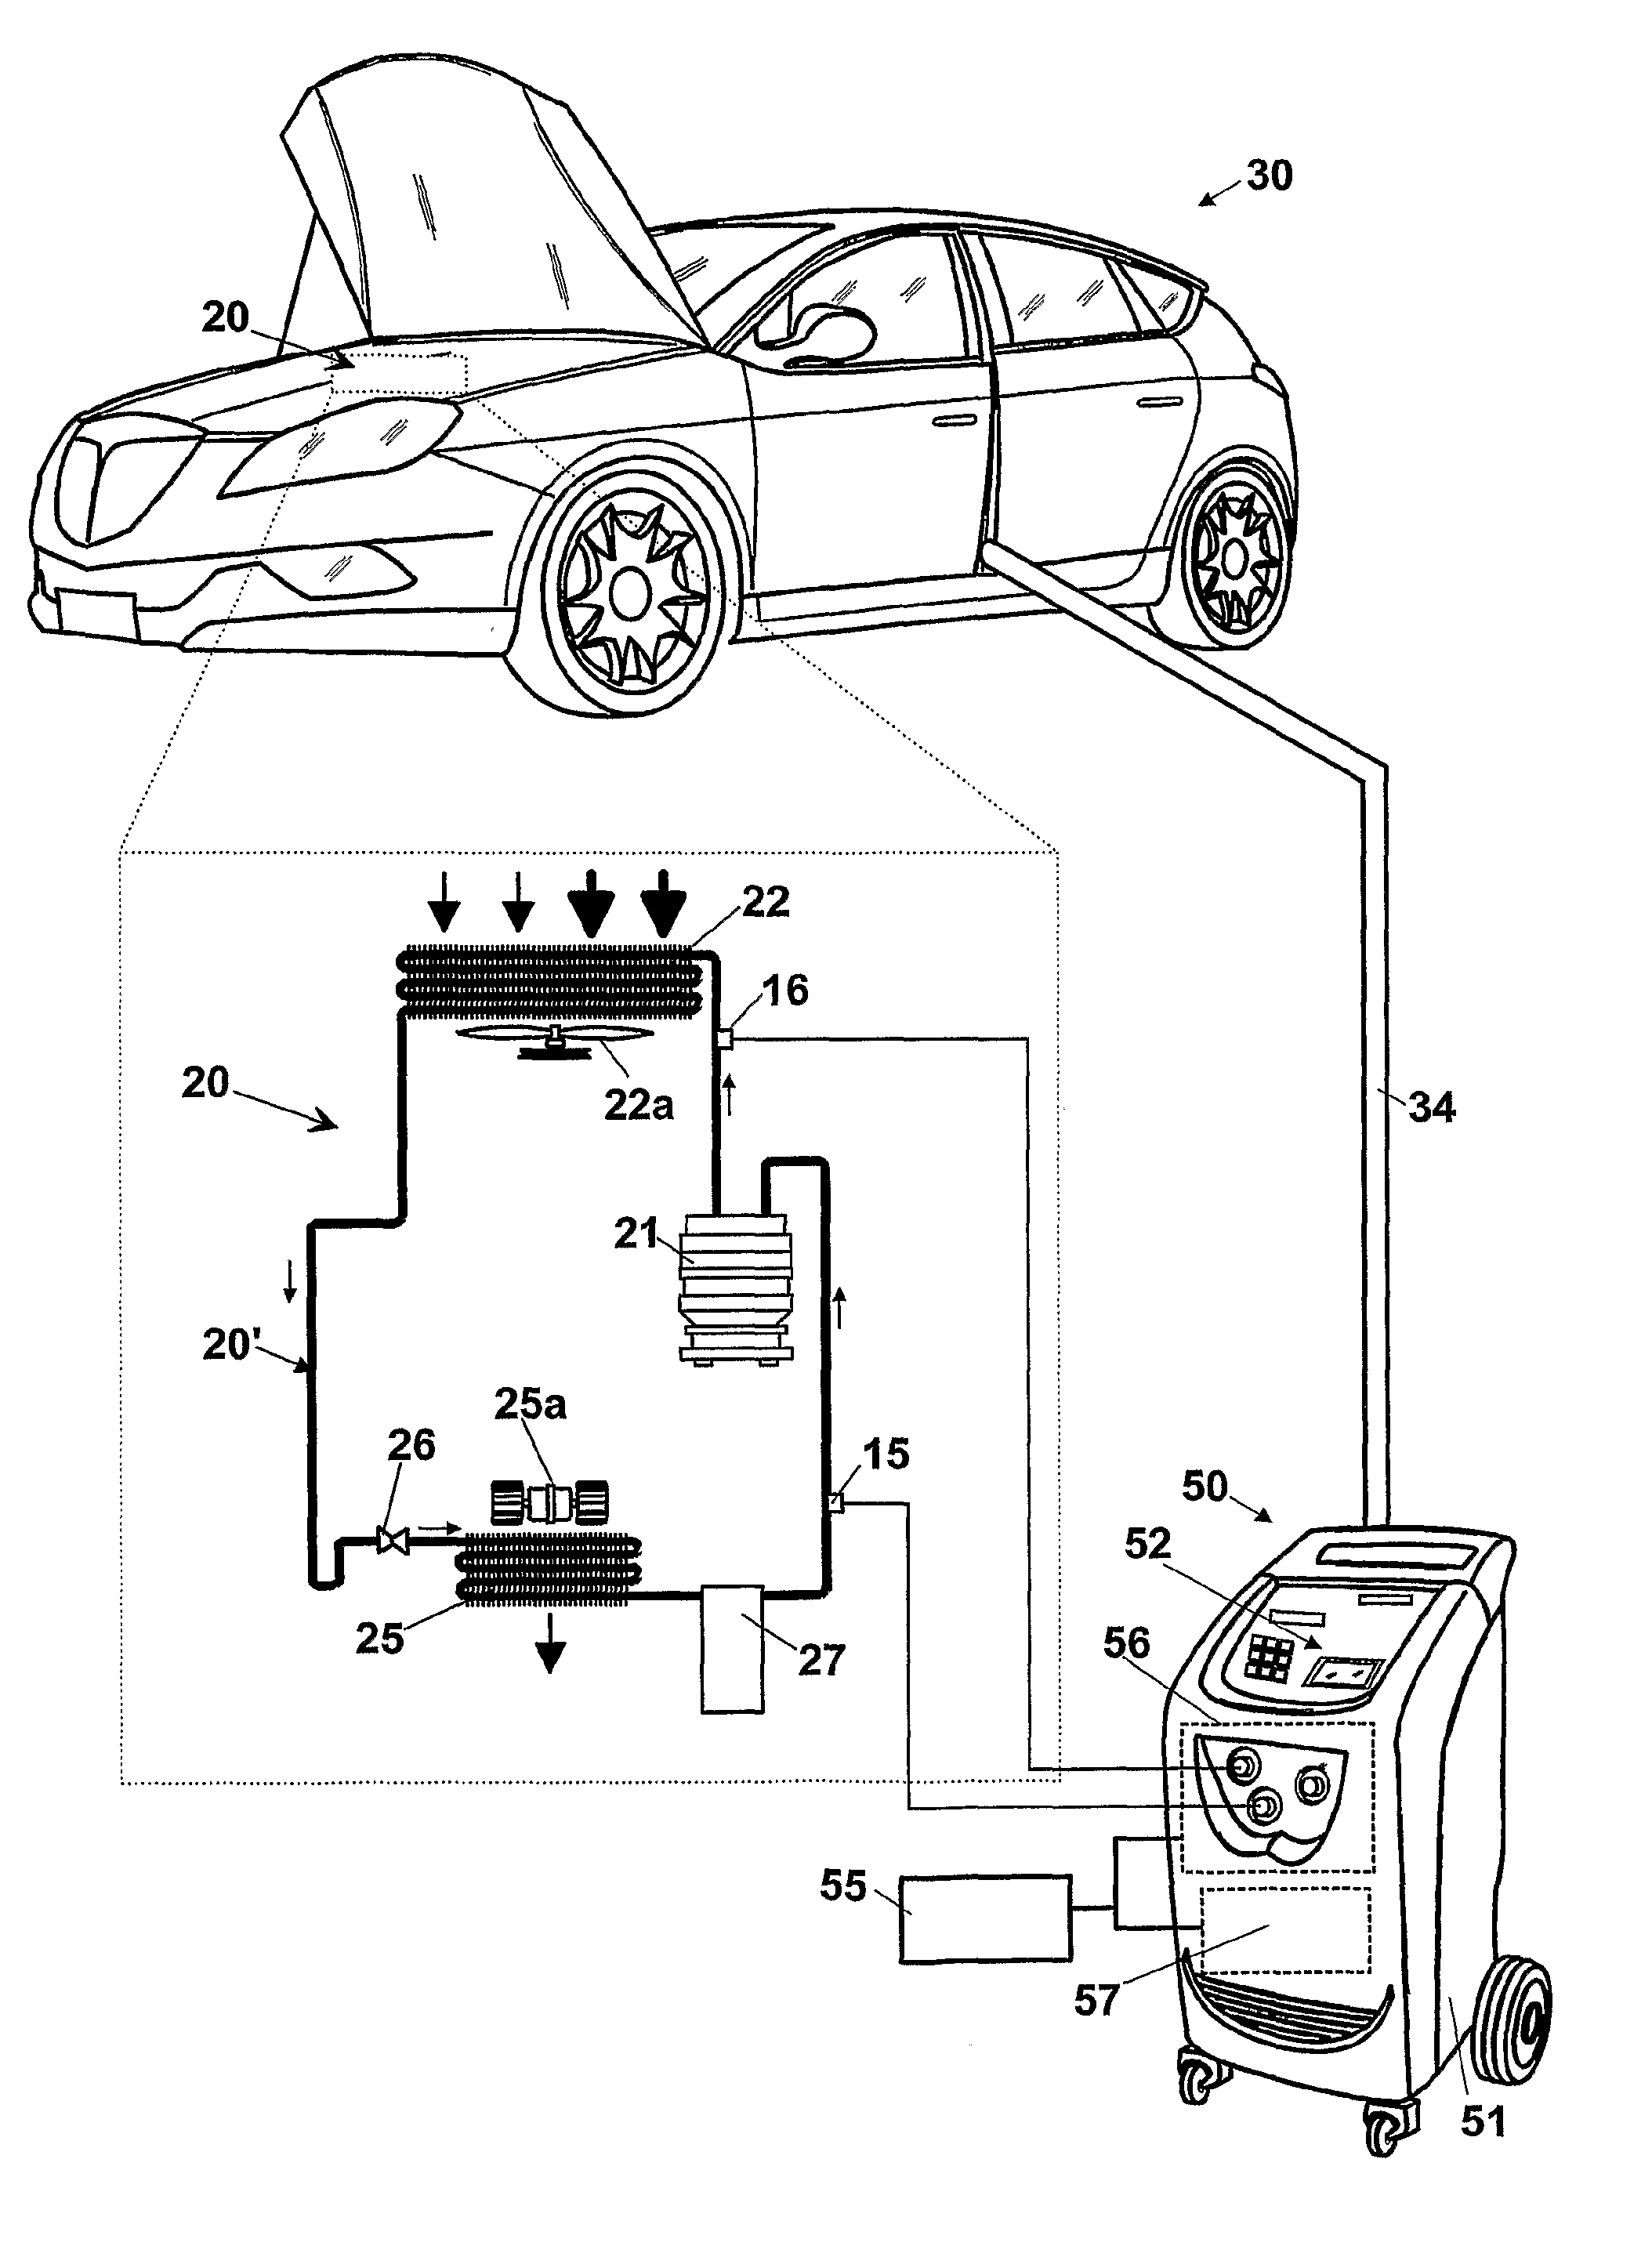 Maintenance apparatus and method for an air conditioning system of a motor vehicle